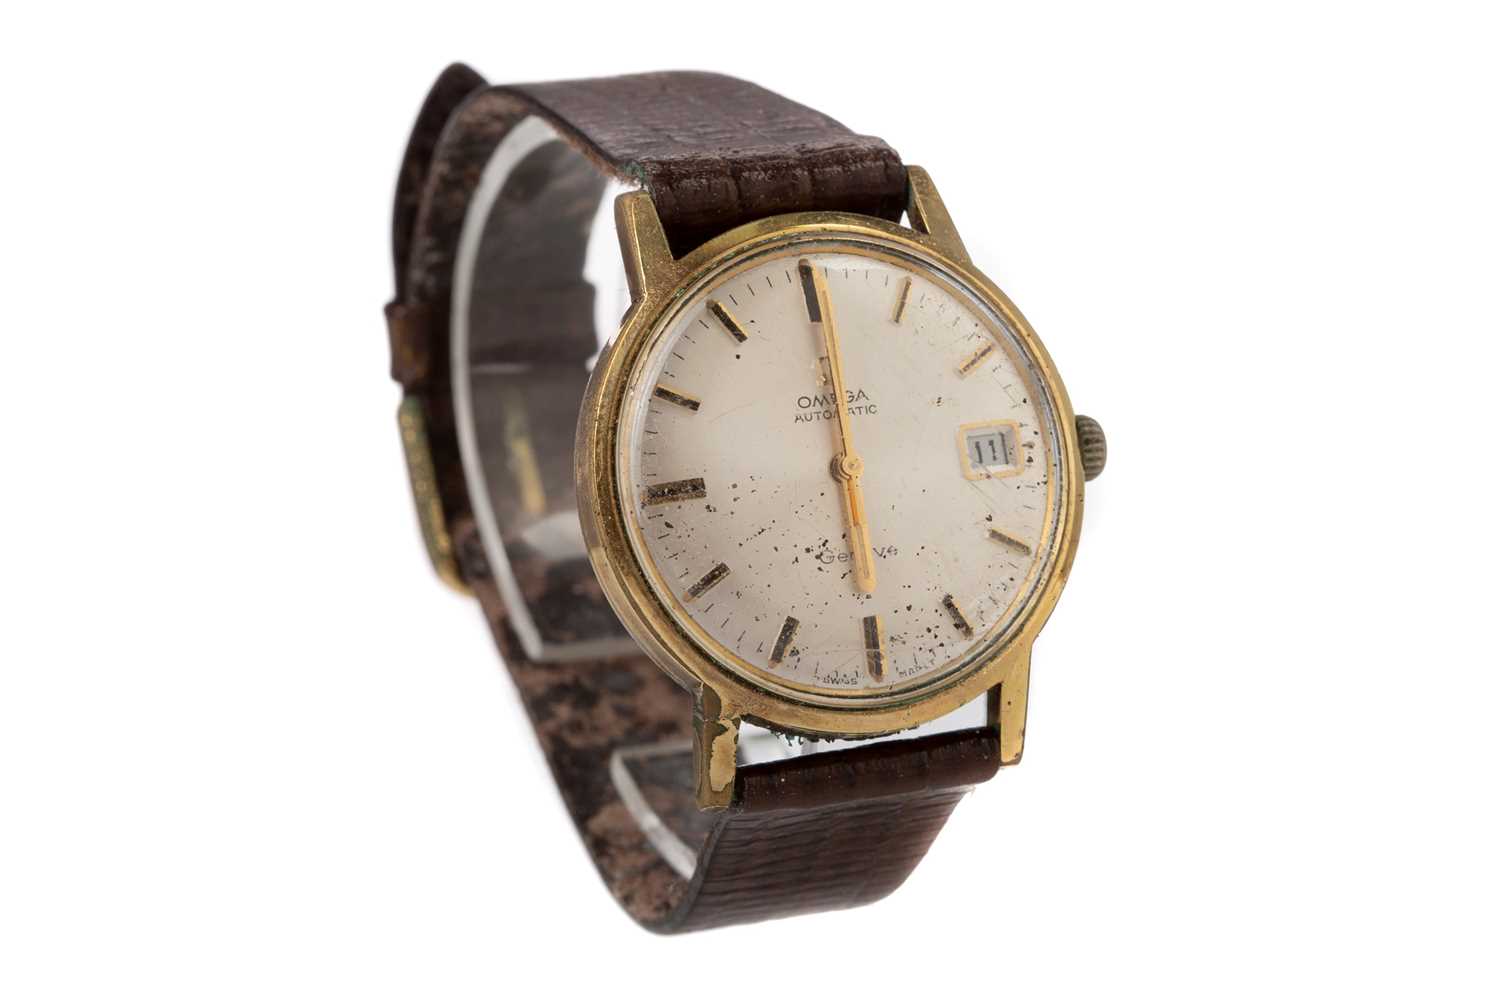 Lot 902 - A GENTLEMAN'S OMEGA GOLD PLATED AUTOMATIC WRIST WATCH